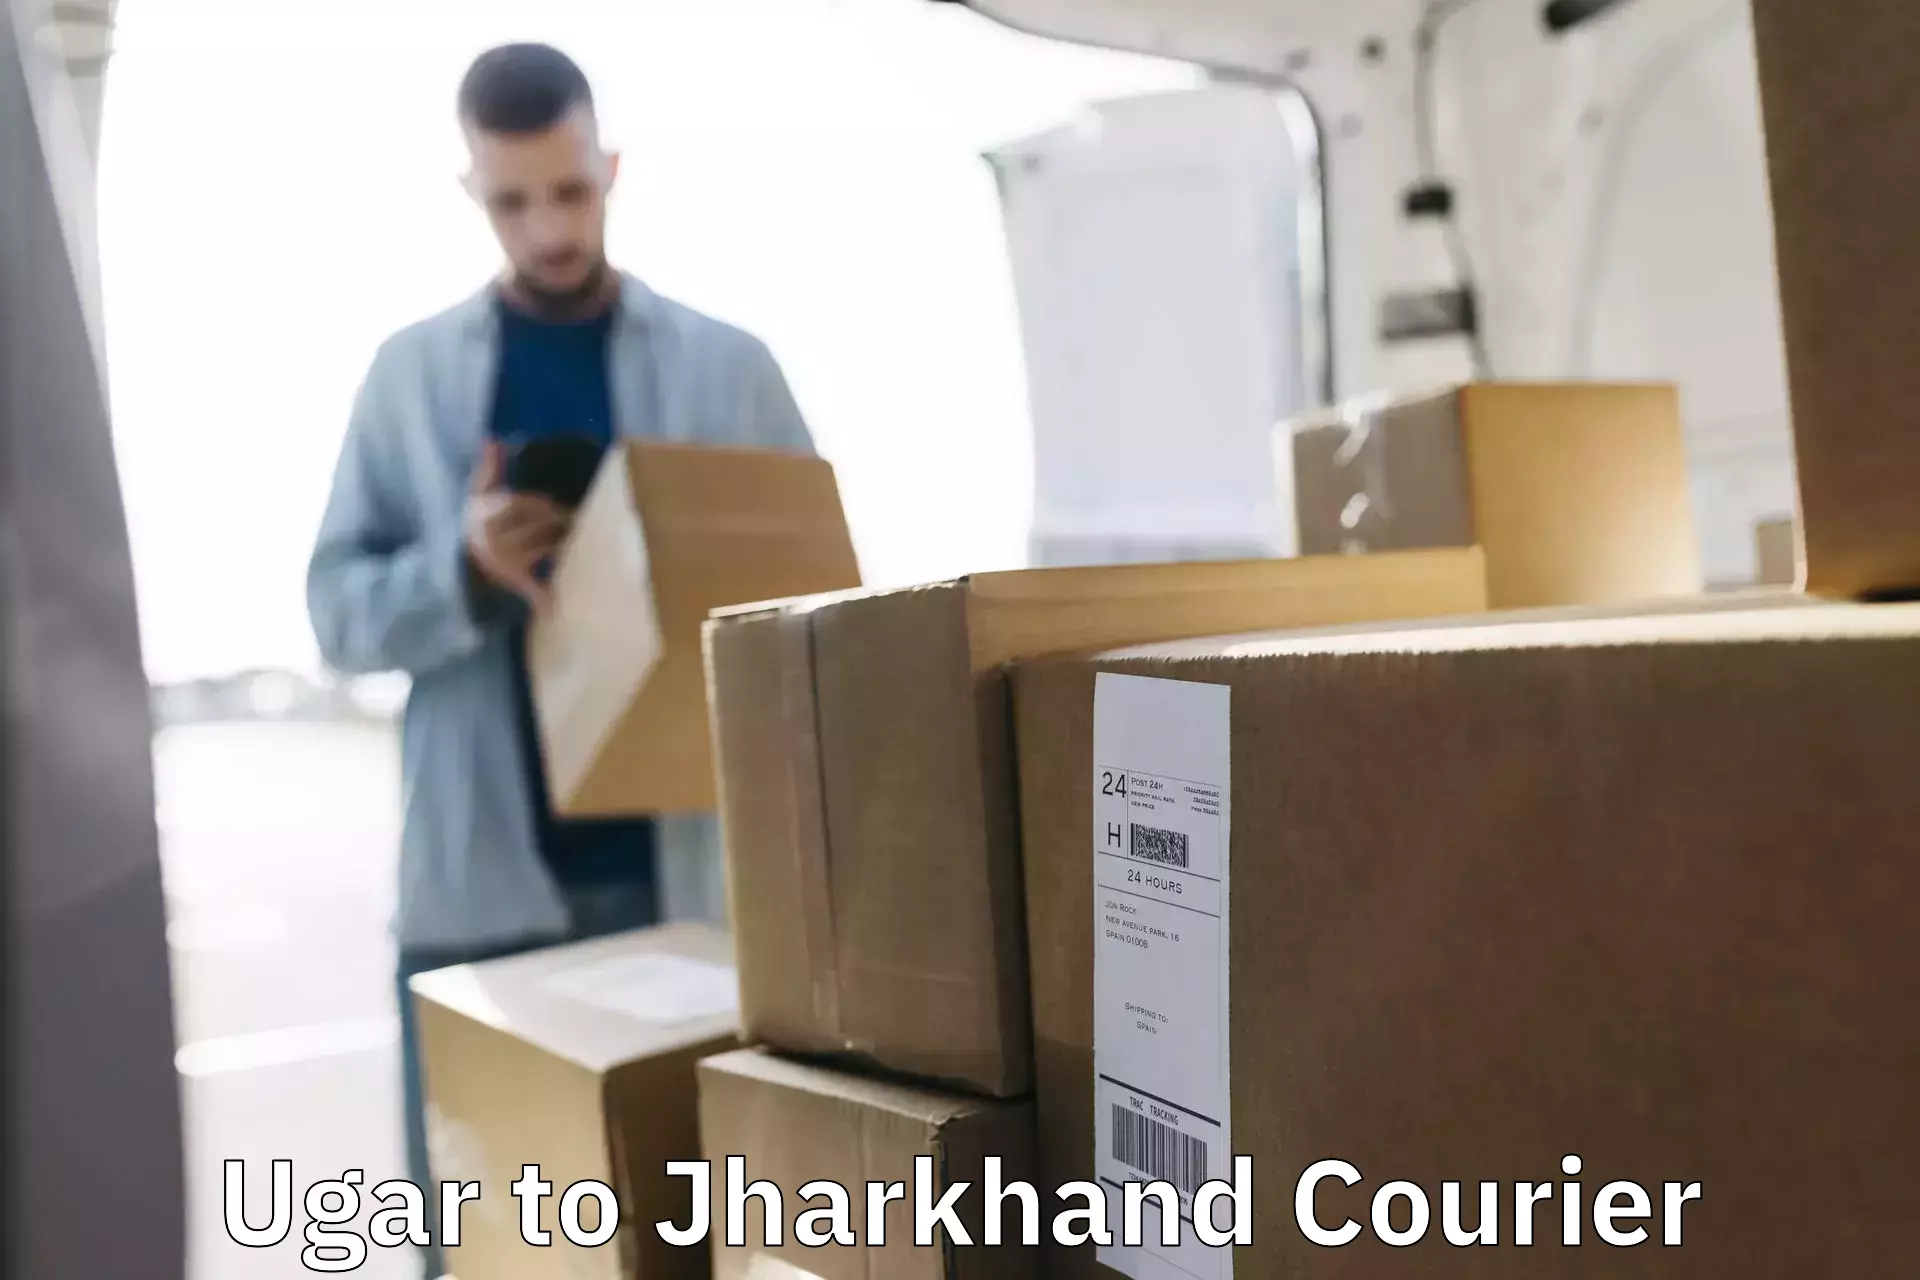 On-call courier service in Ugar to Bagodar